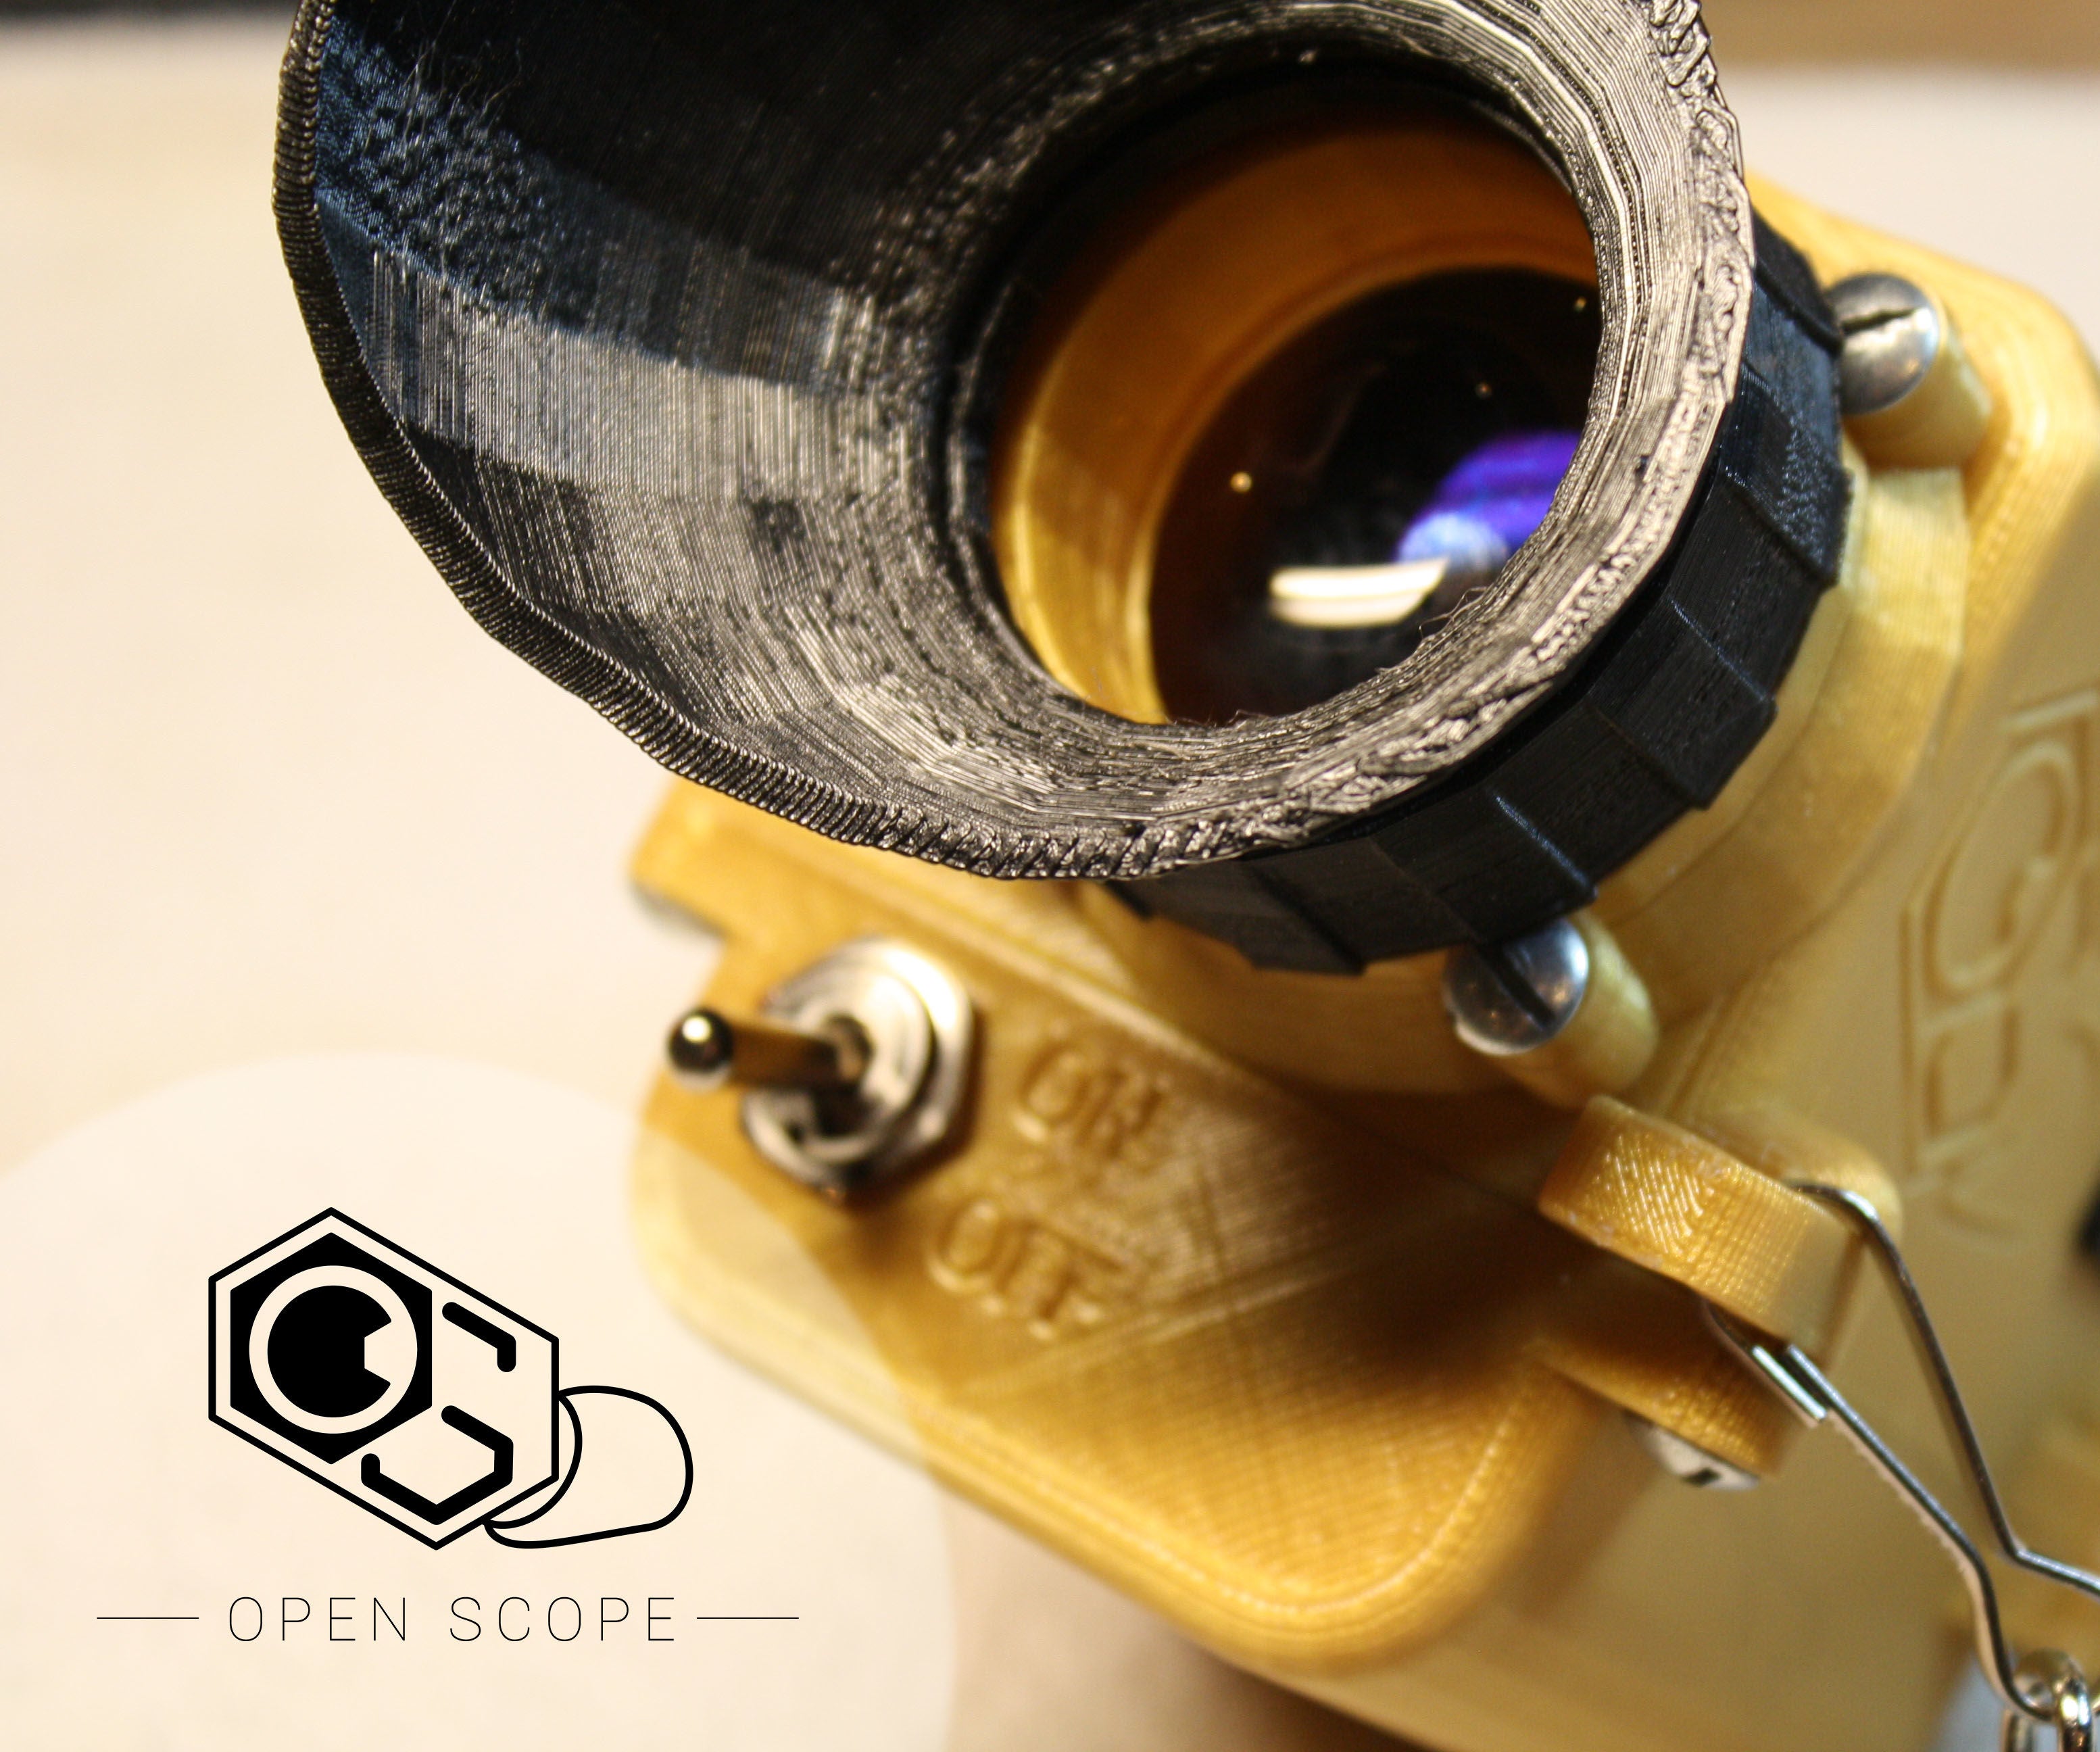 3D Printed Digital Night Vision (The OpenScope)